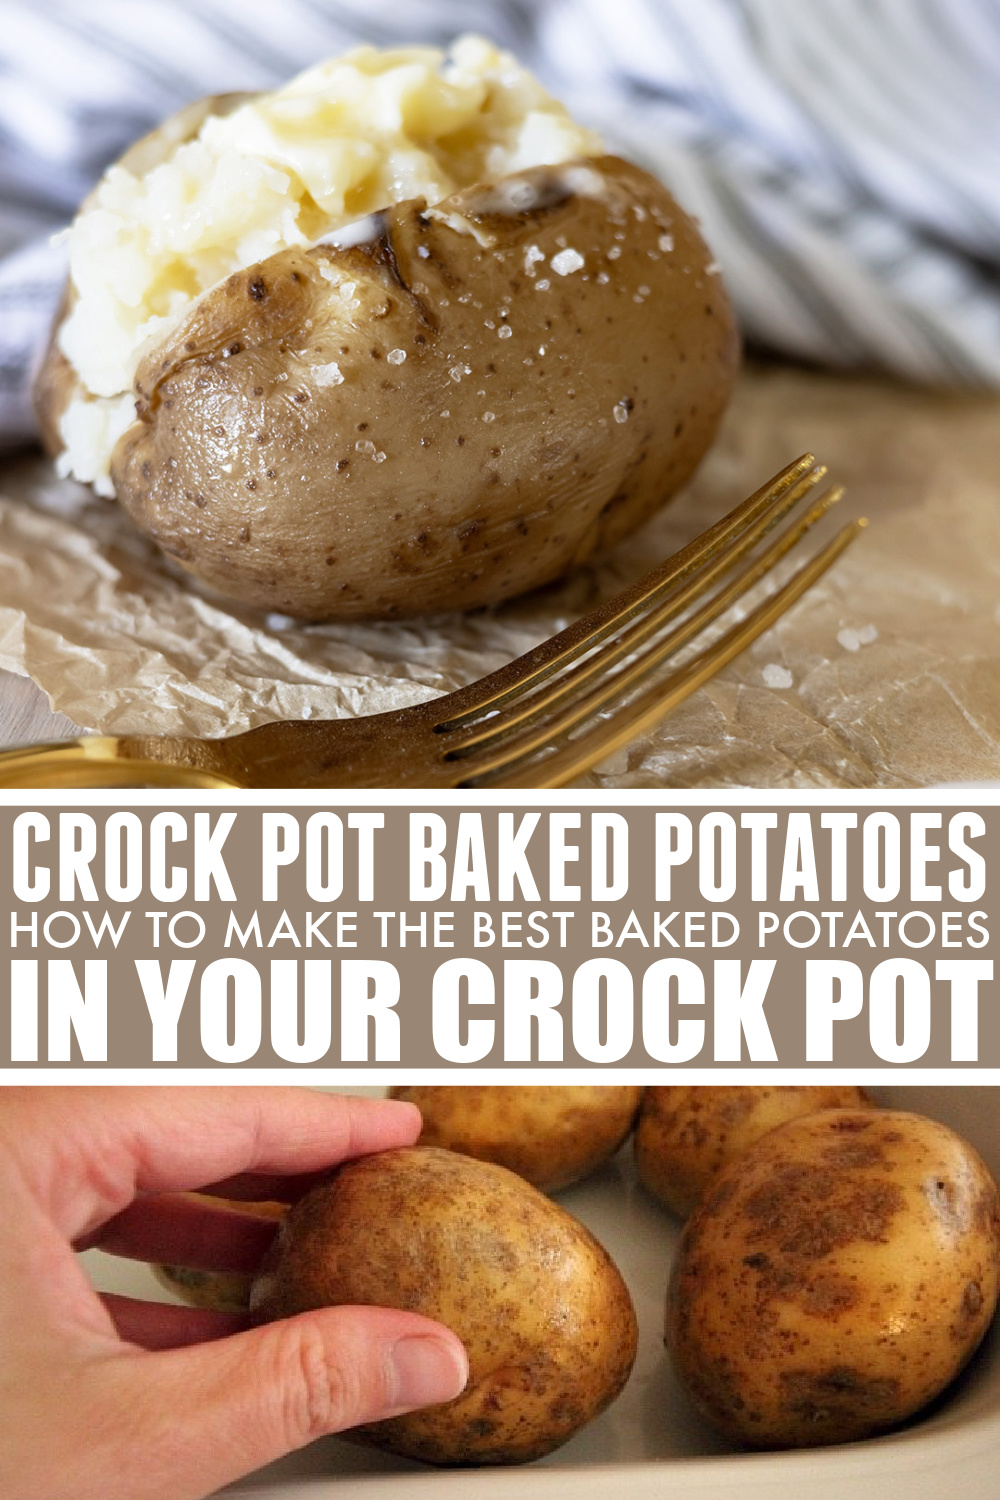 Making baked potatoes in a crock pot